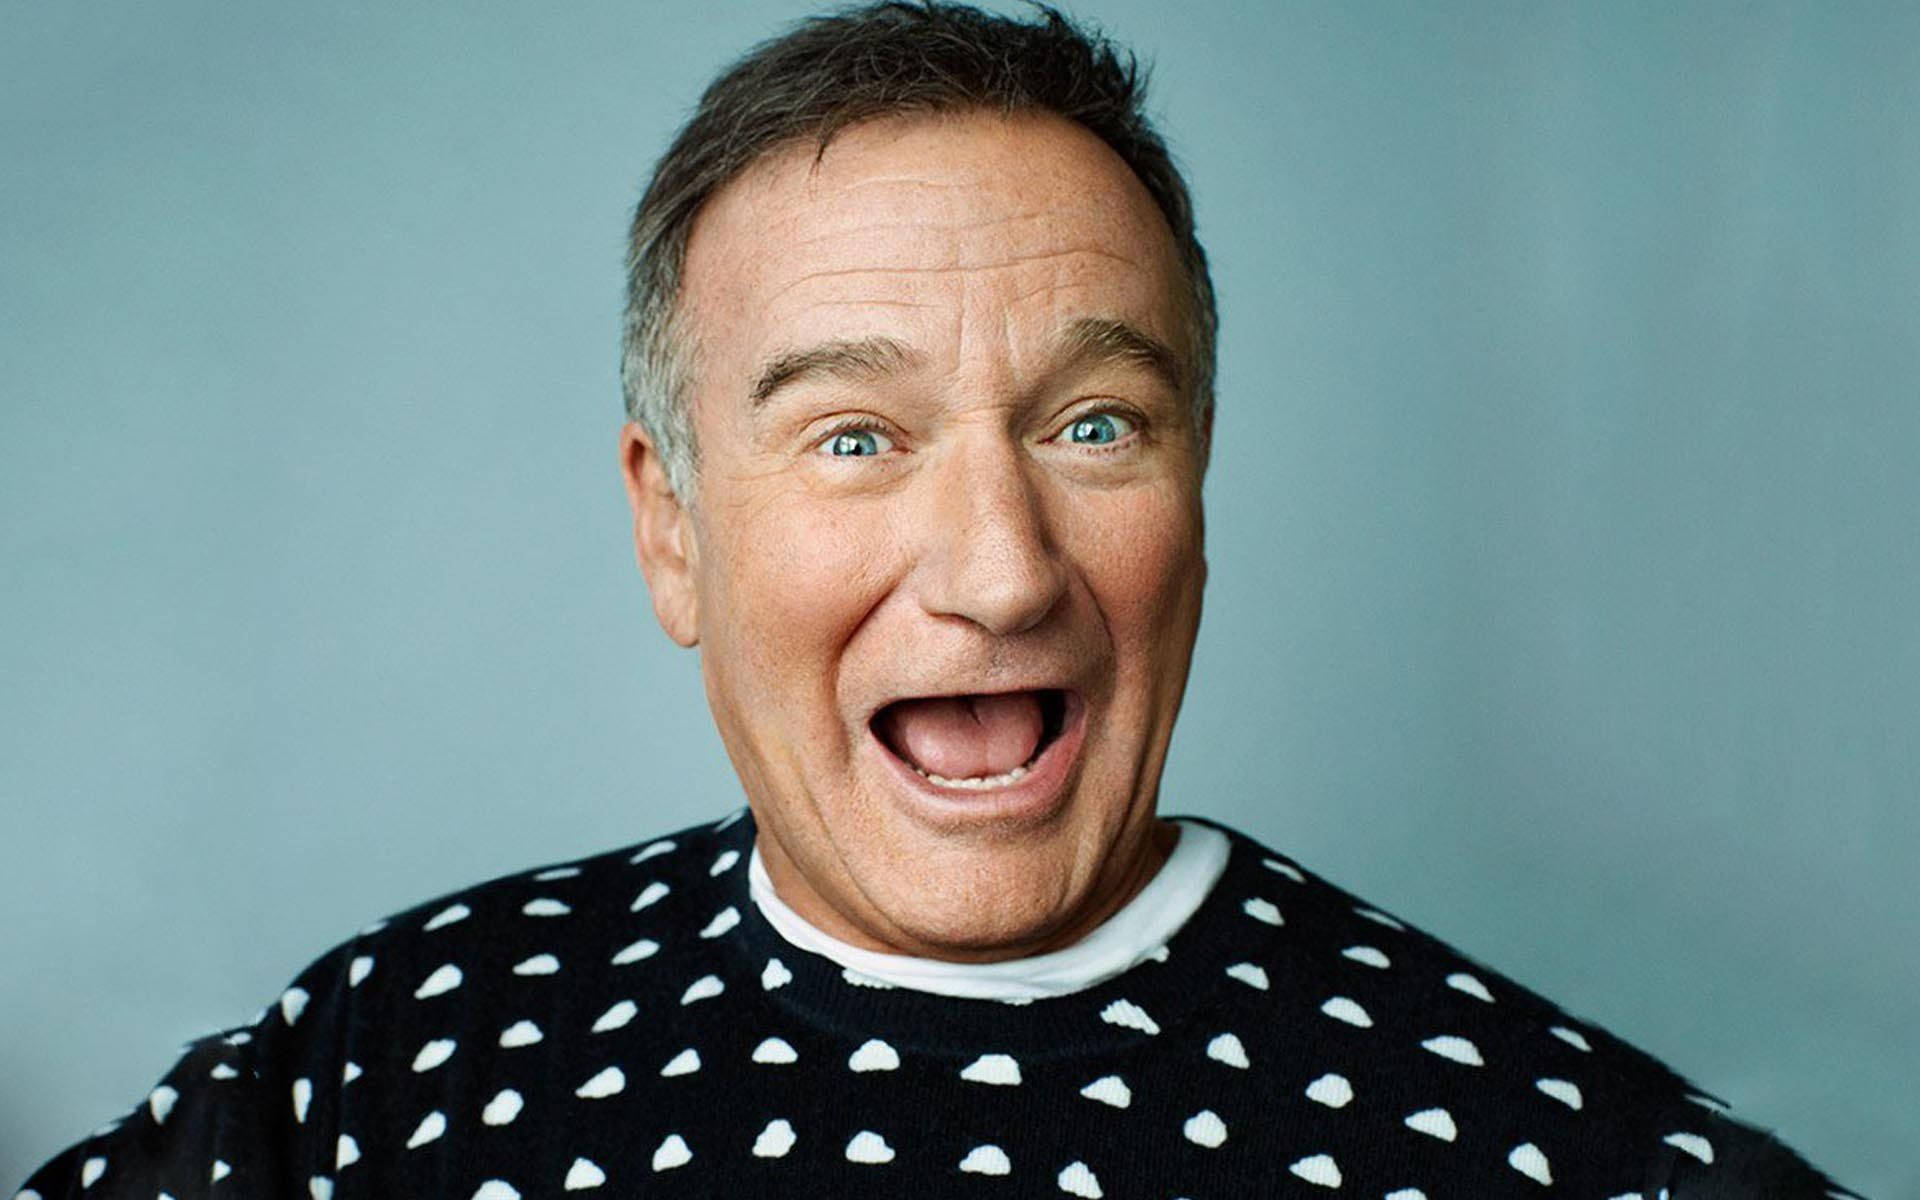 Download Stunning Robin Williams Smiling Photograph Wallpaper | Wallpapers .com